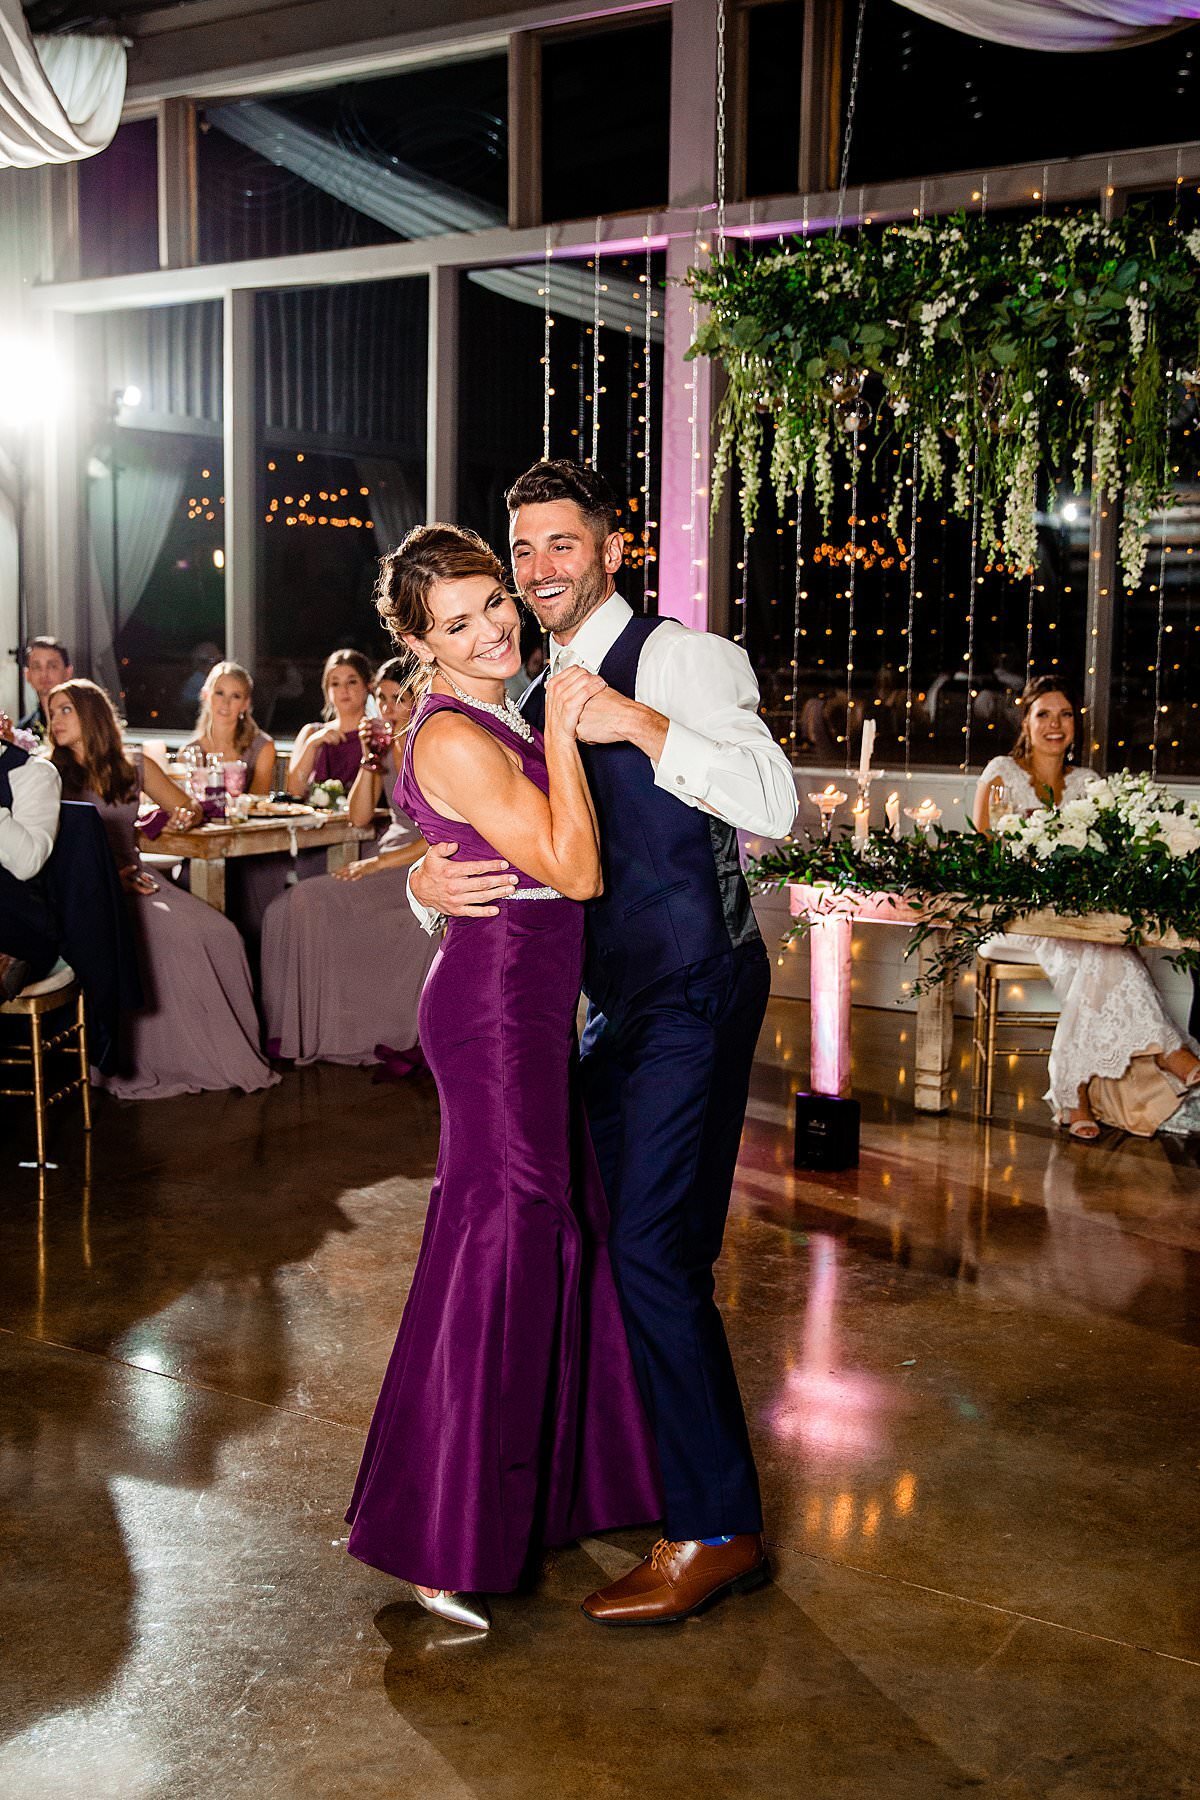 Mother of the Groom wearing an elegant purple taffeta form fitting dress with mermaid flair dancing with her son on the dance floor at Drakewood Farm